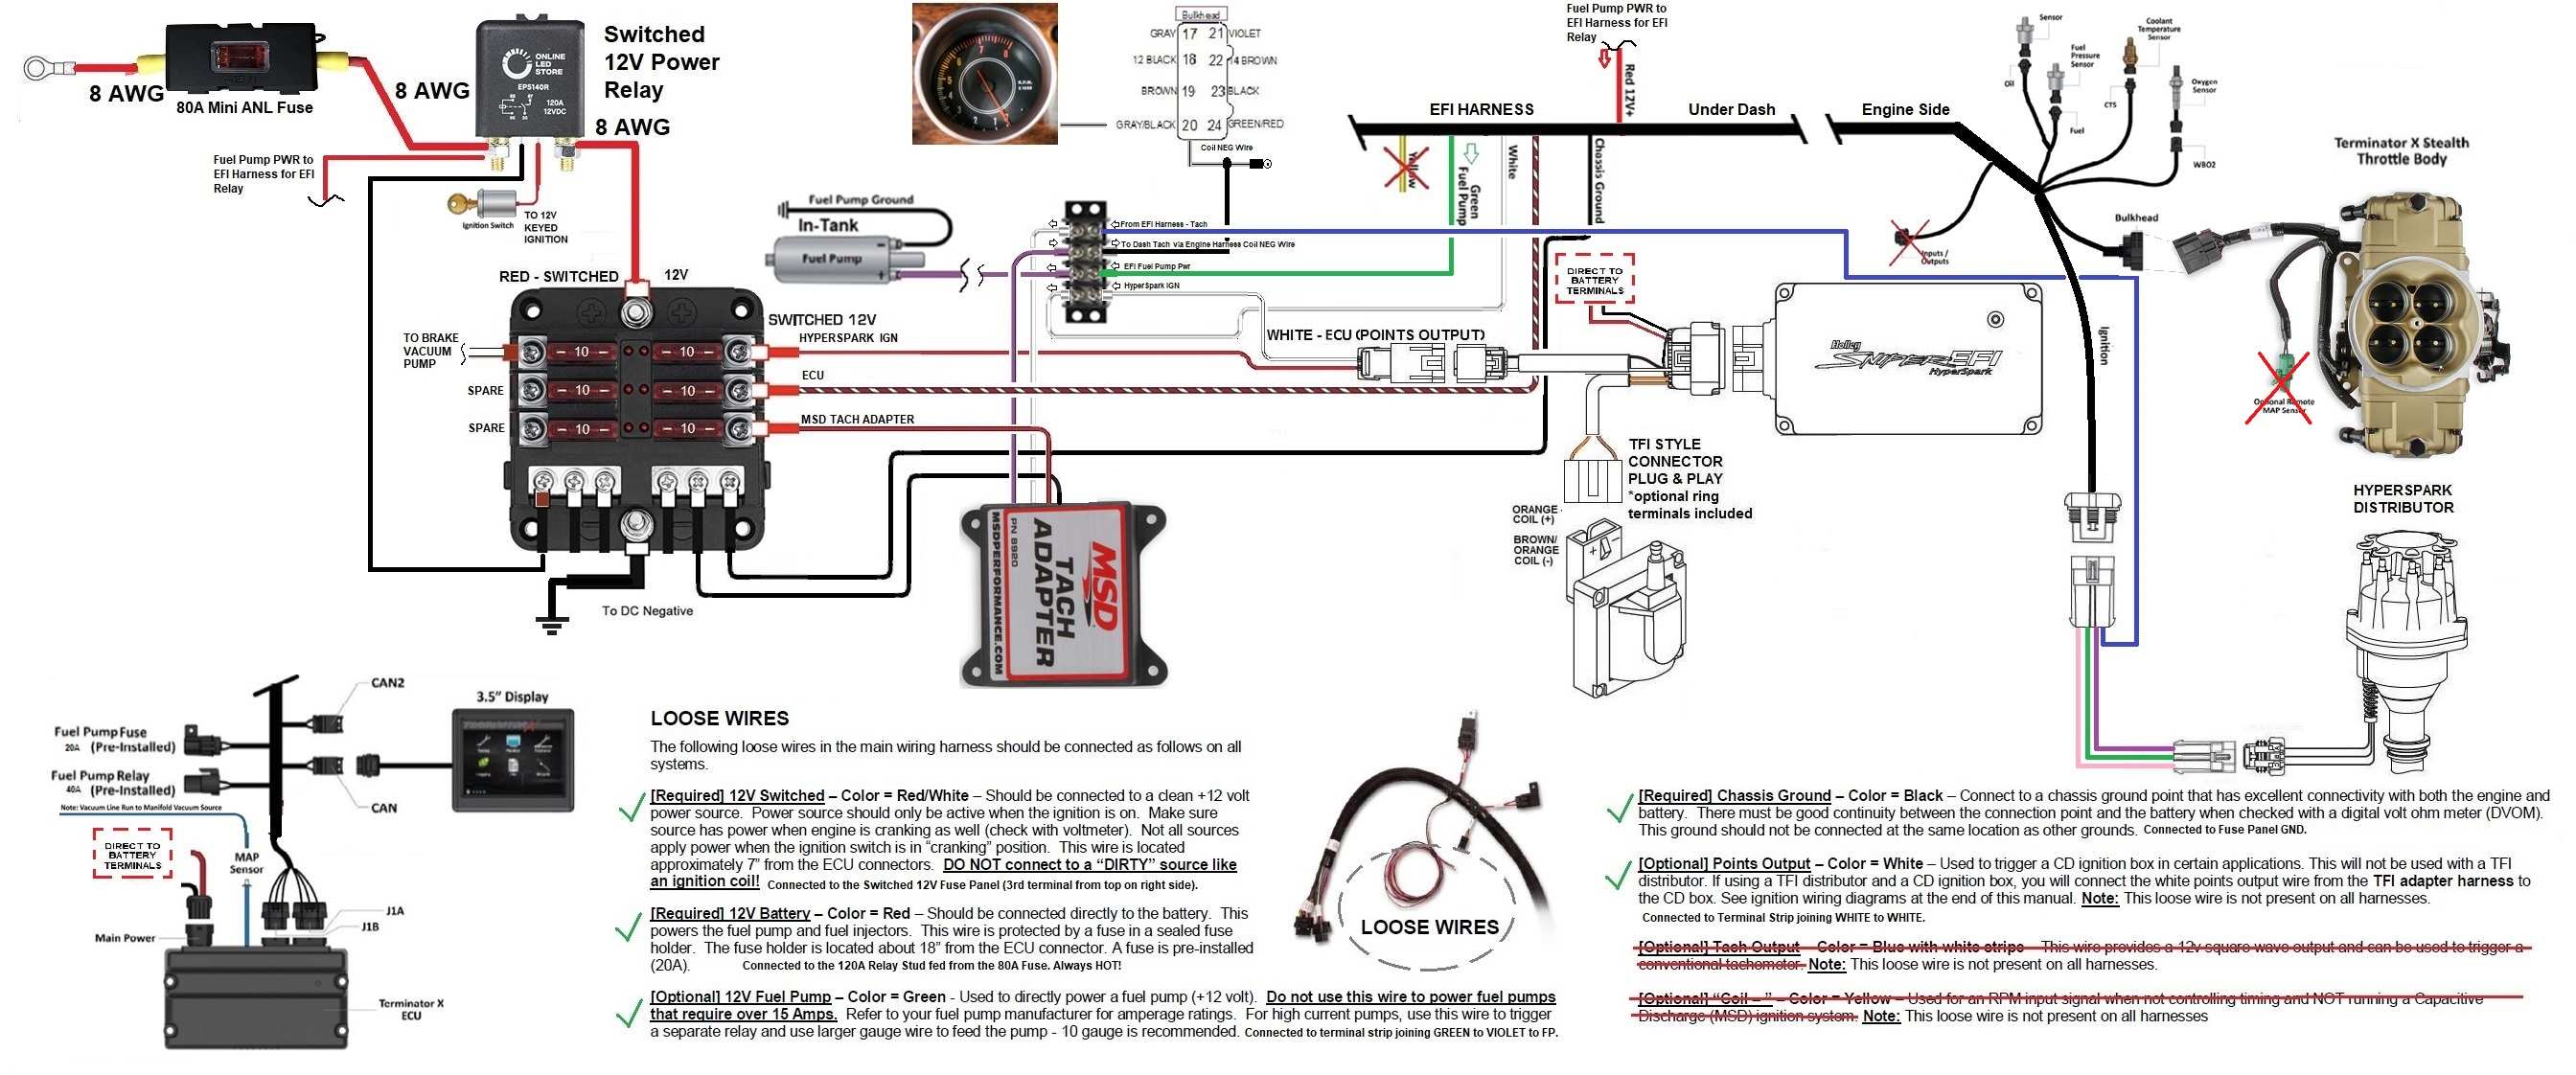 1 Our Overall Wiring Diagram for Terminator X Stealth EFI.jpg